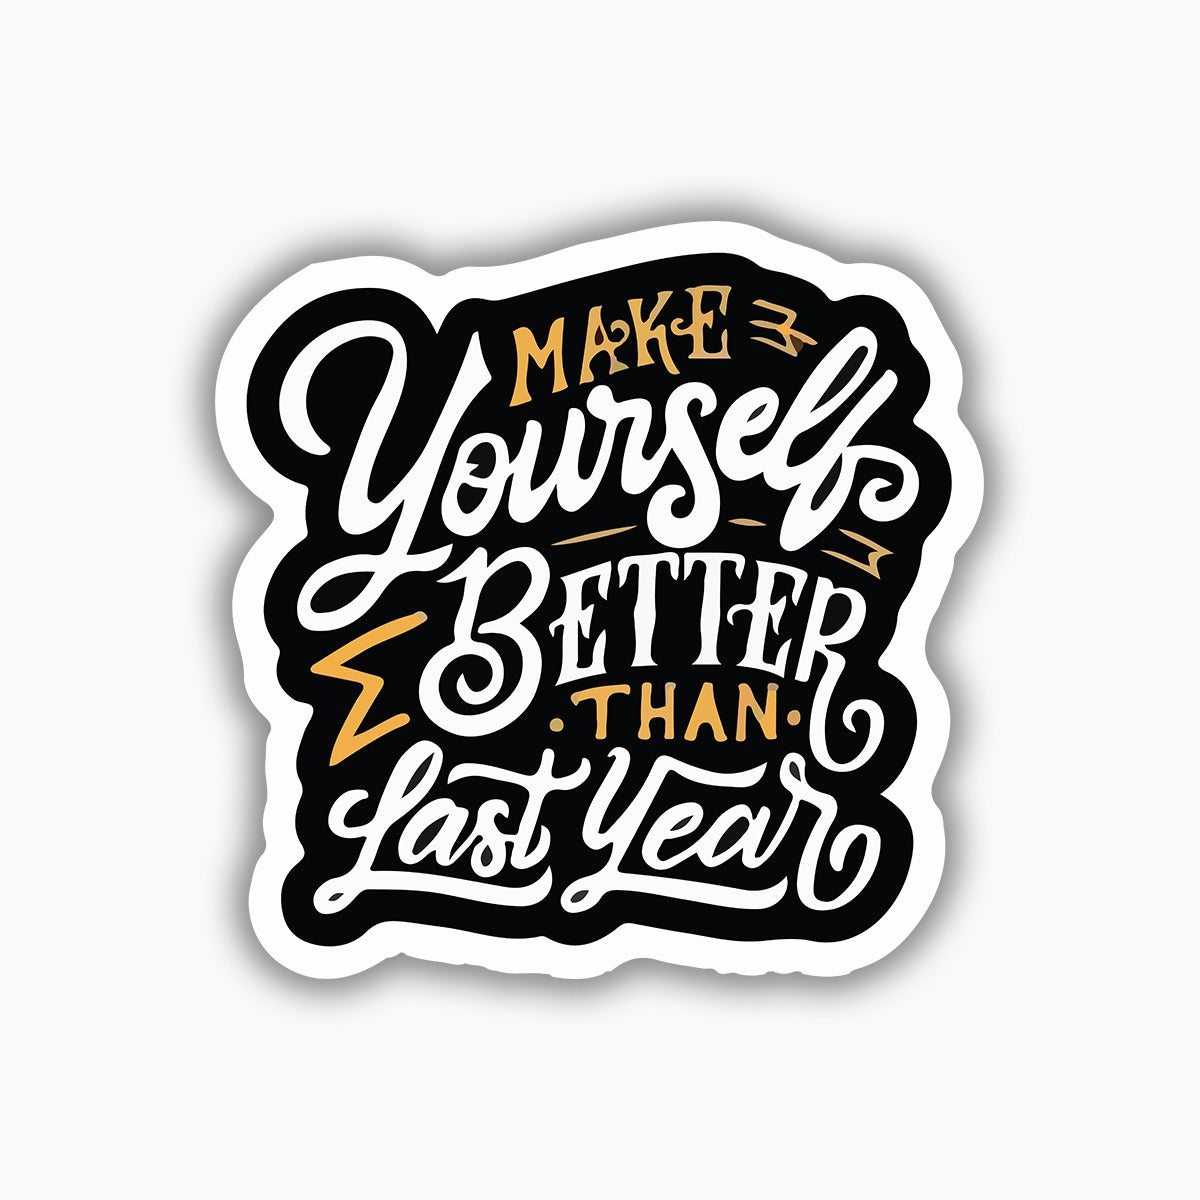 Make yourself better than last year